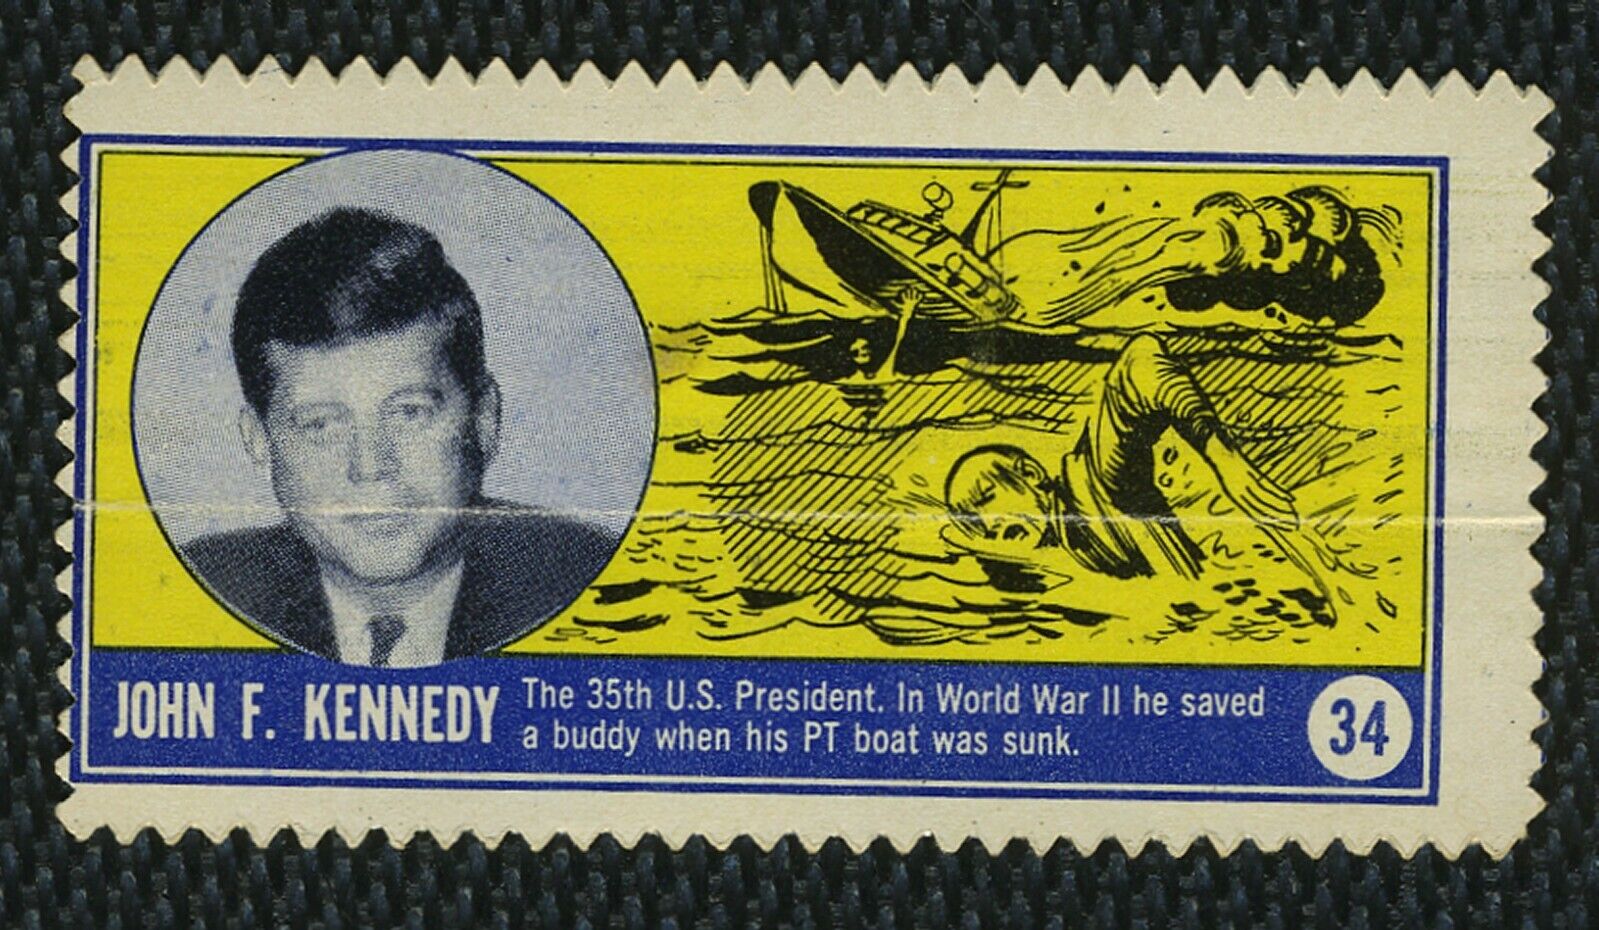 1962 Topps Famous Americans Stamps - #34 John F Kennedy - 35th US President